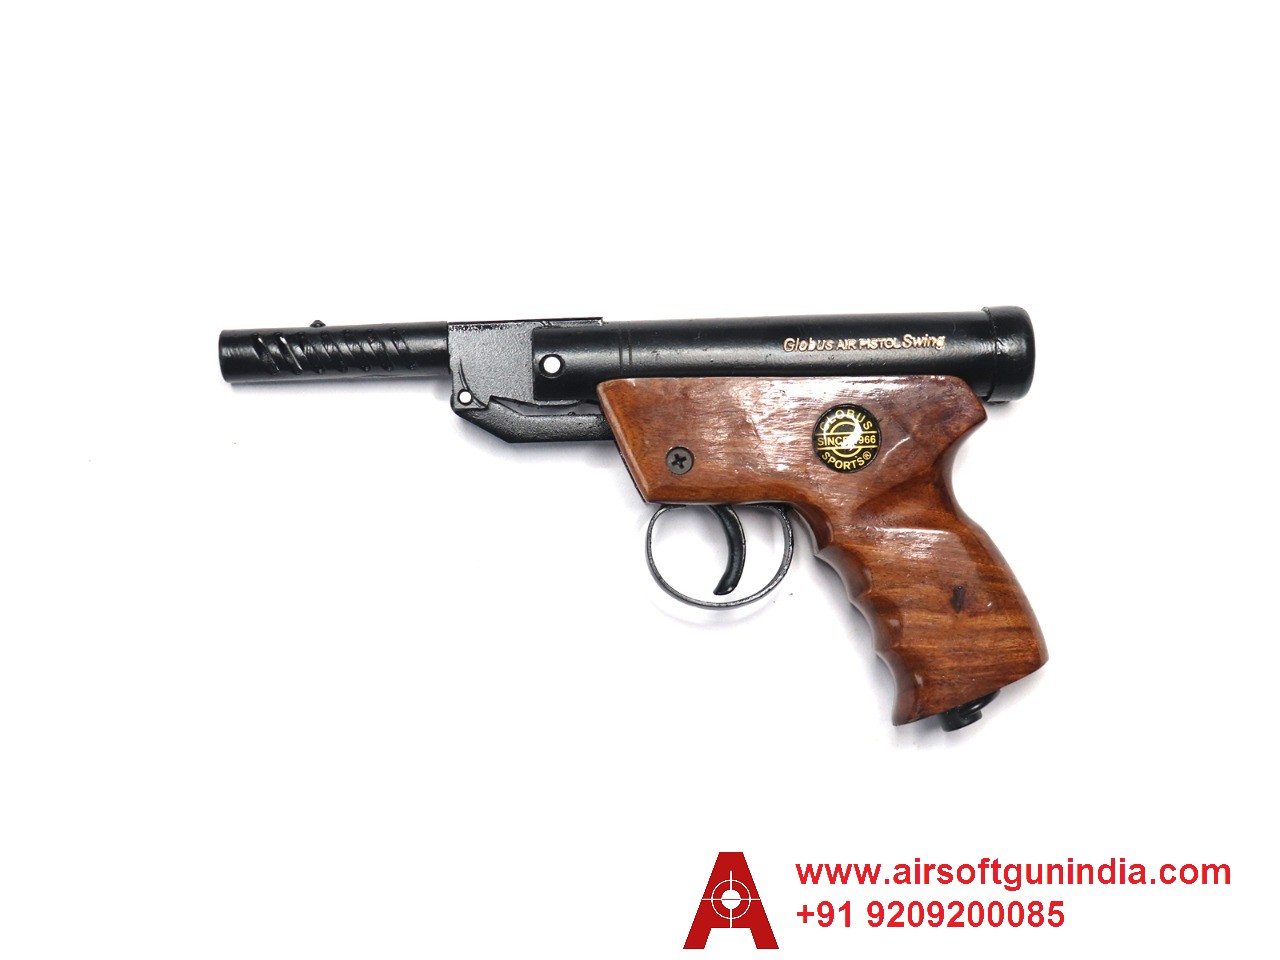 Globus Swing Wooden Sports .177 Air Pistol By Airsoft Gun India